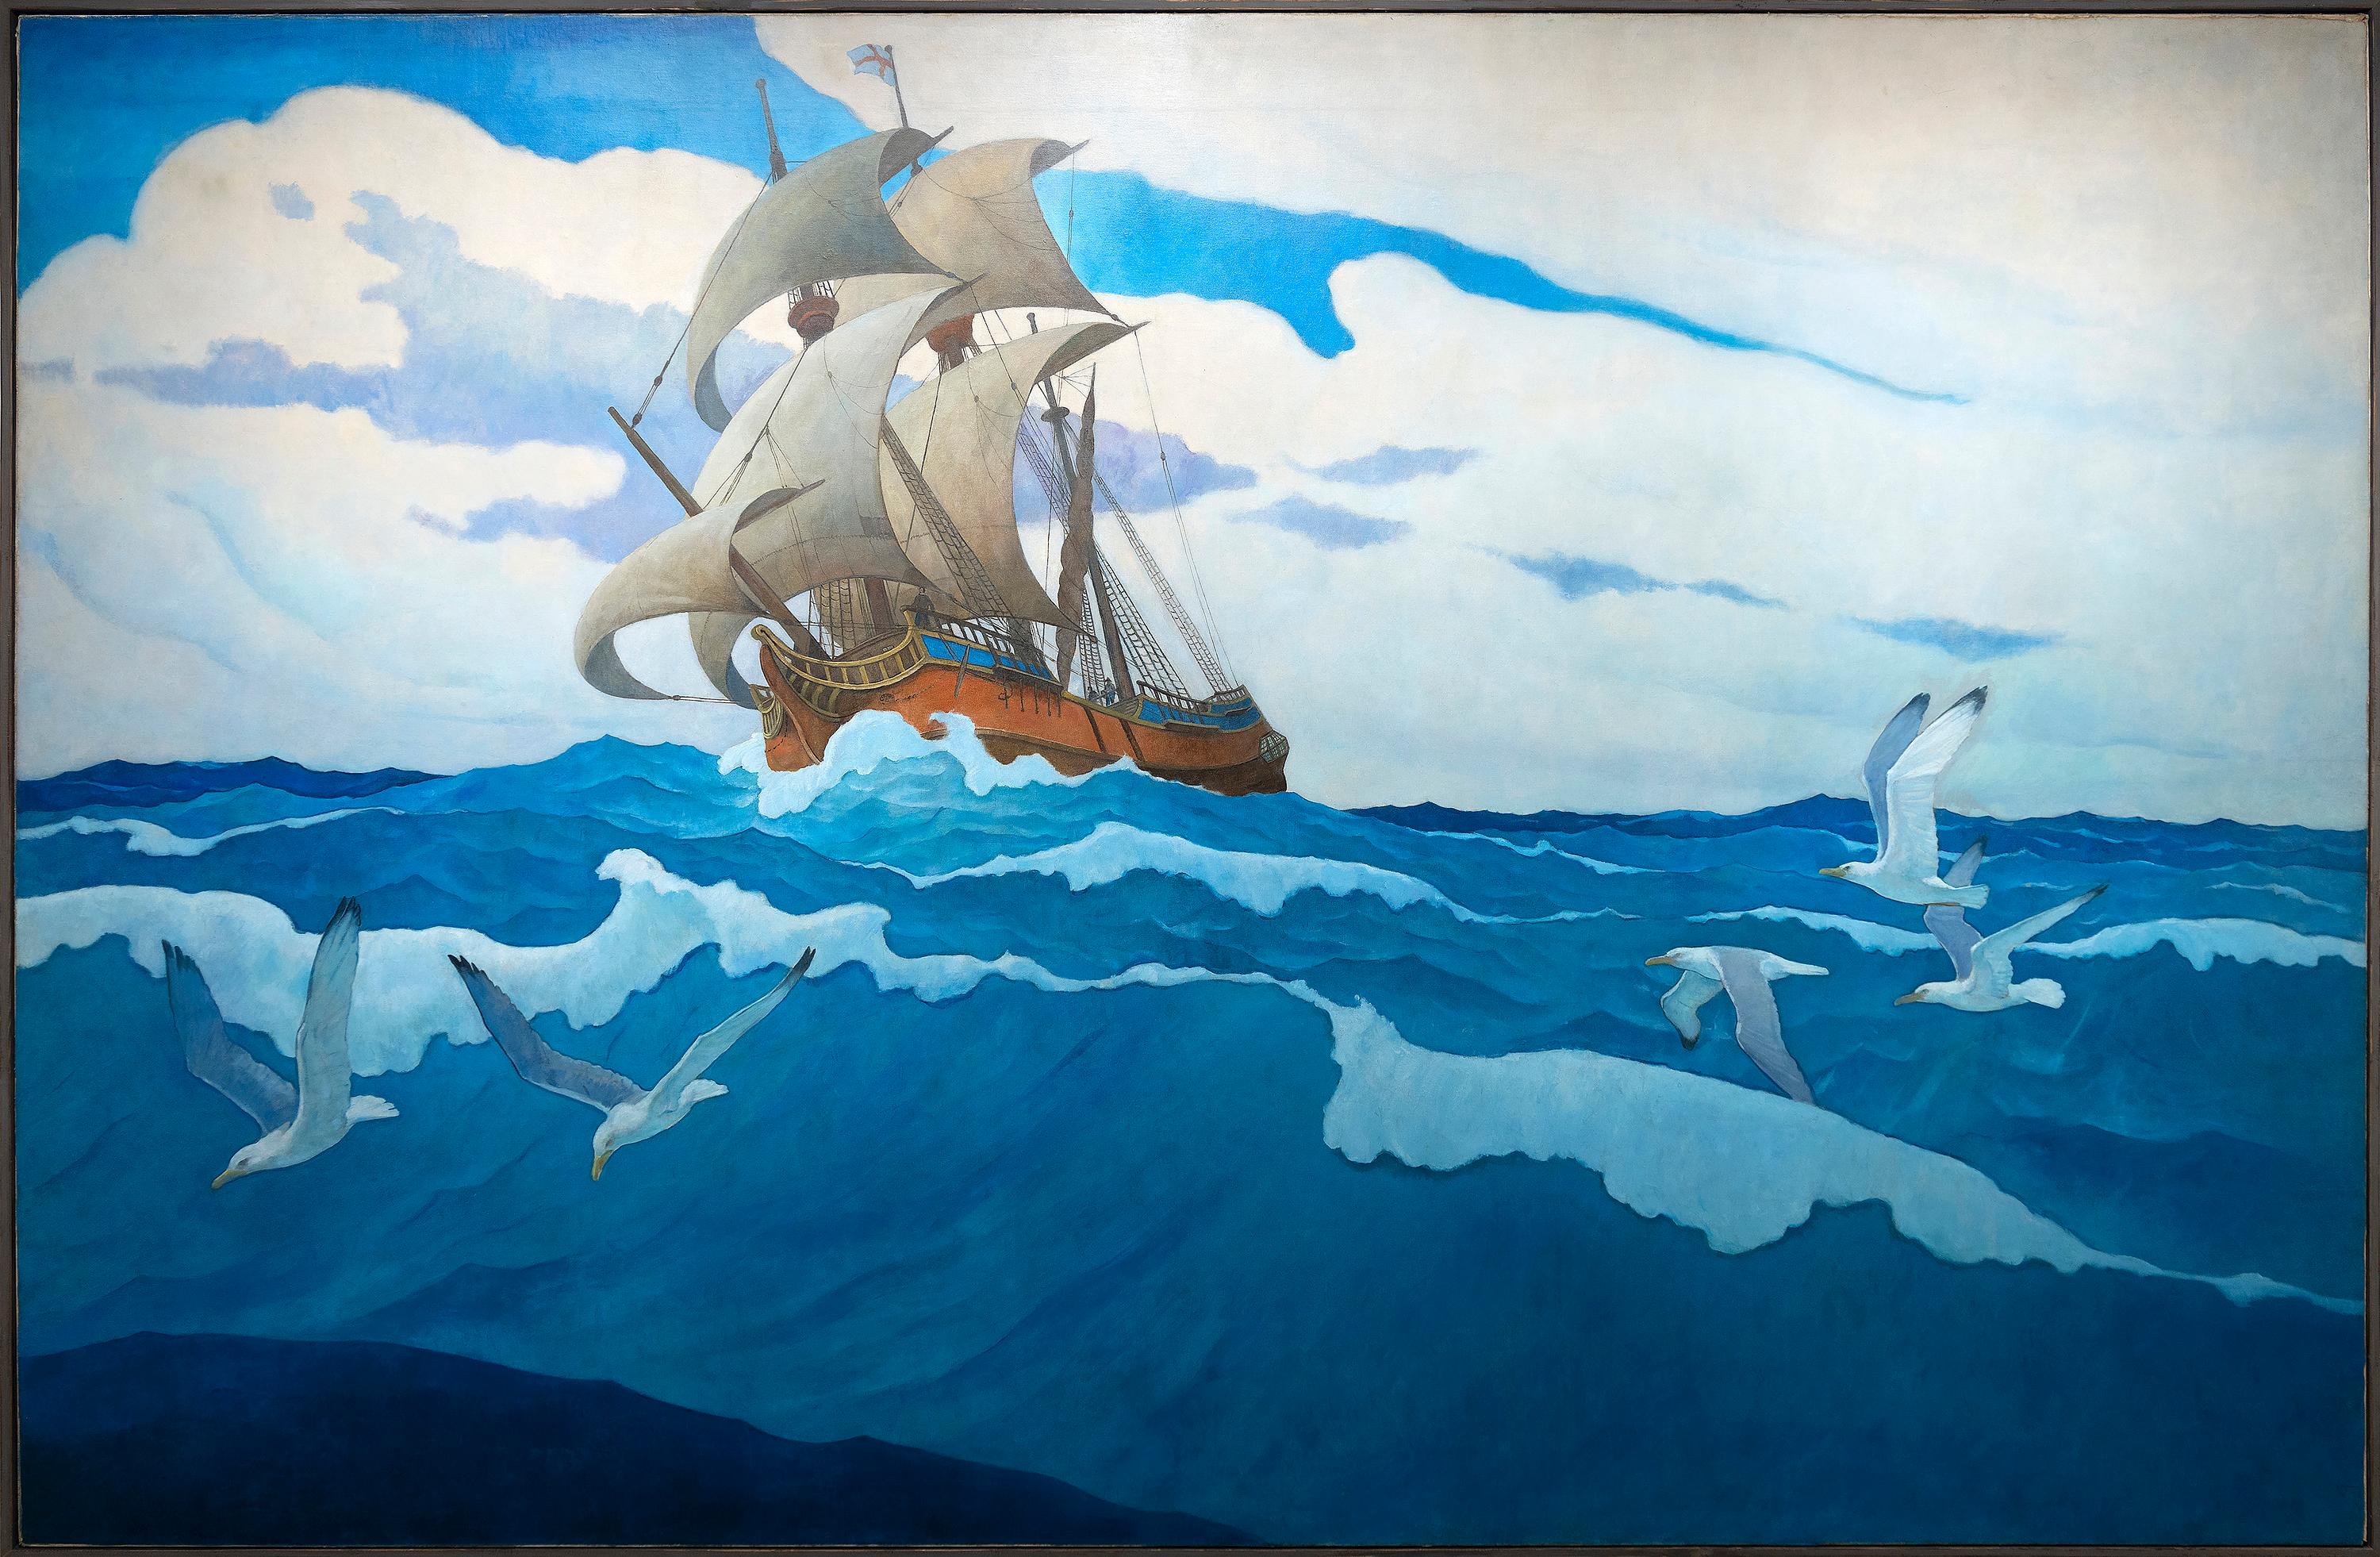 The Coming of the Mayflower in 1620 - Painting by Newell Convers Wyeth